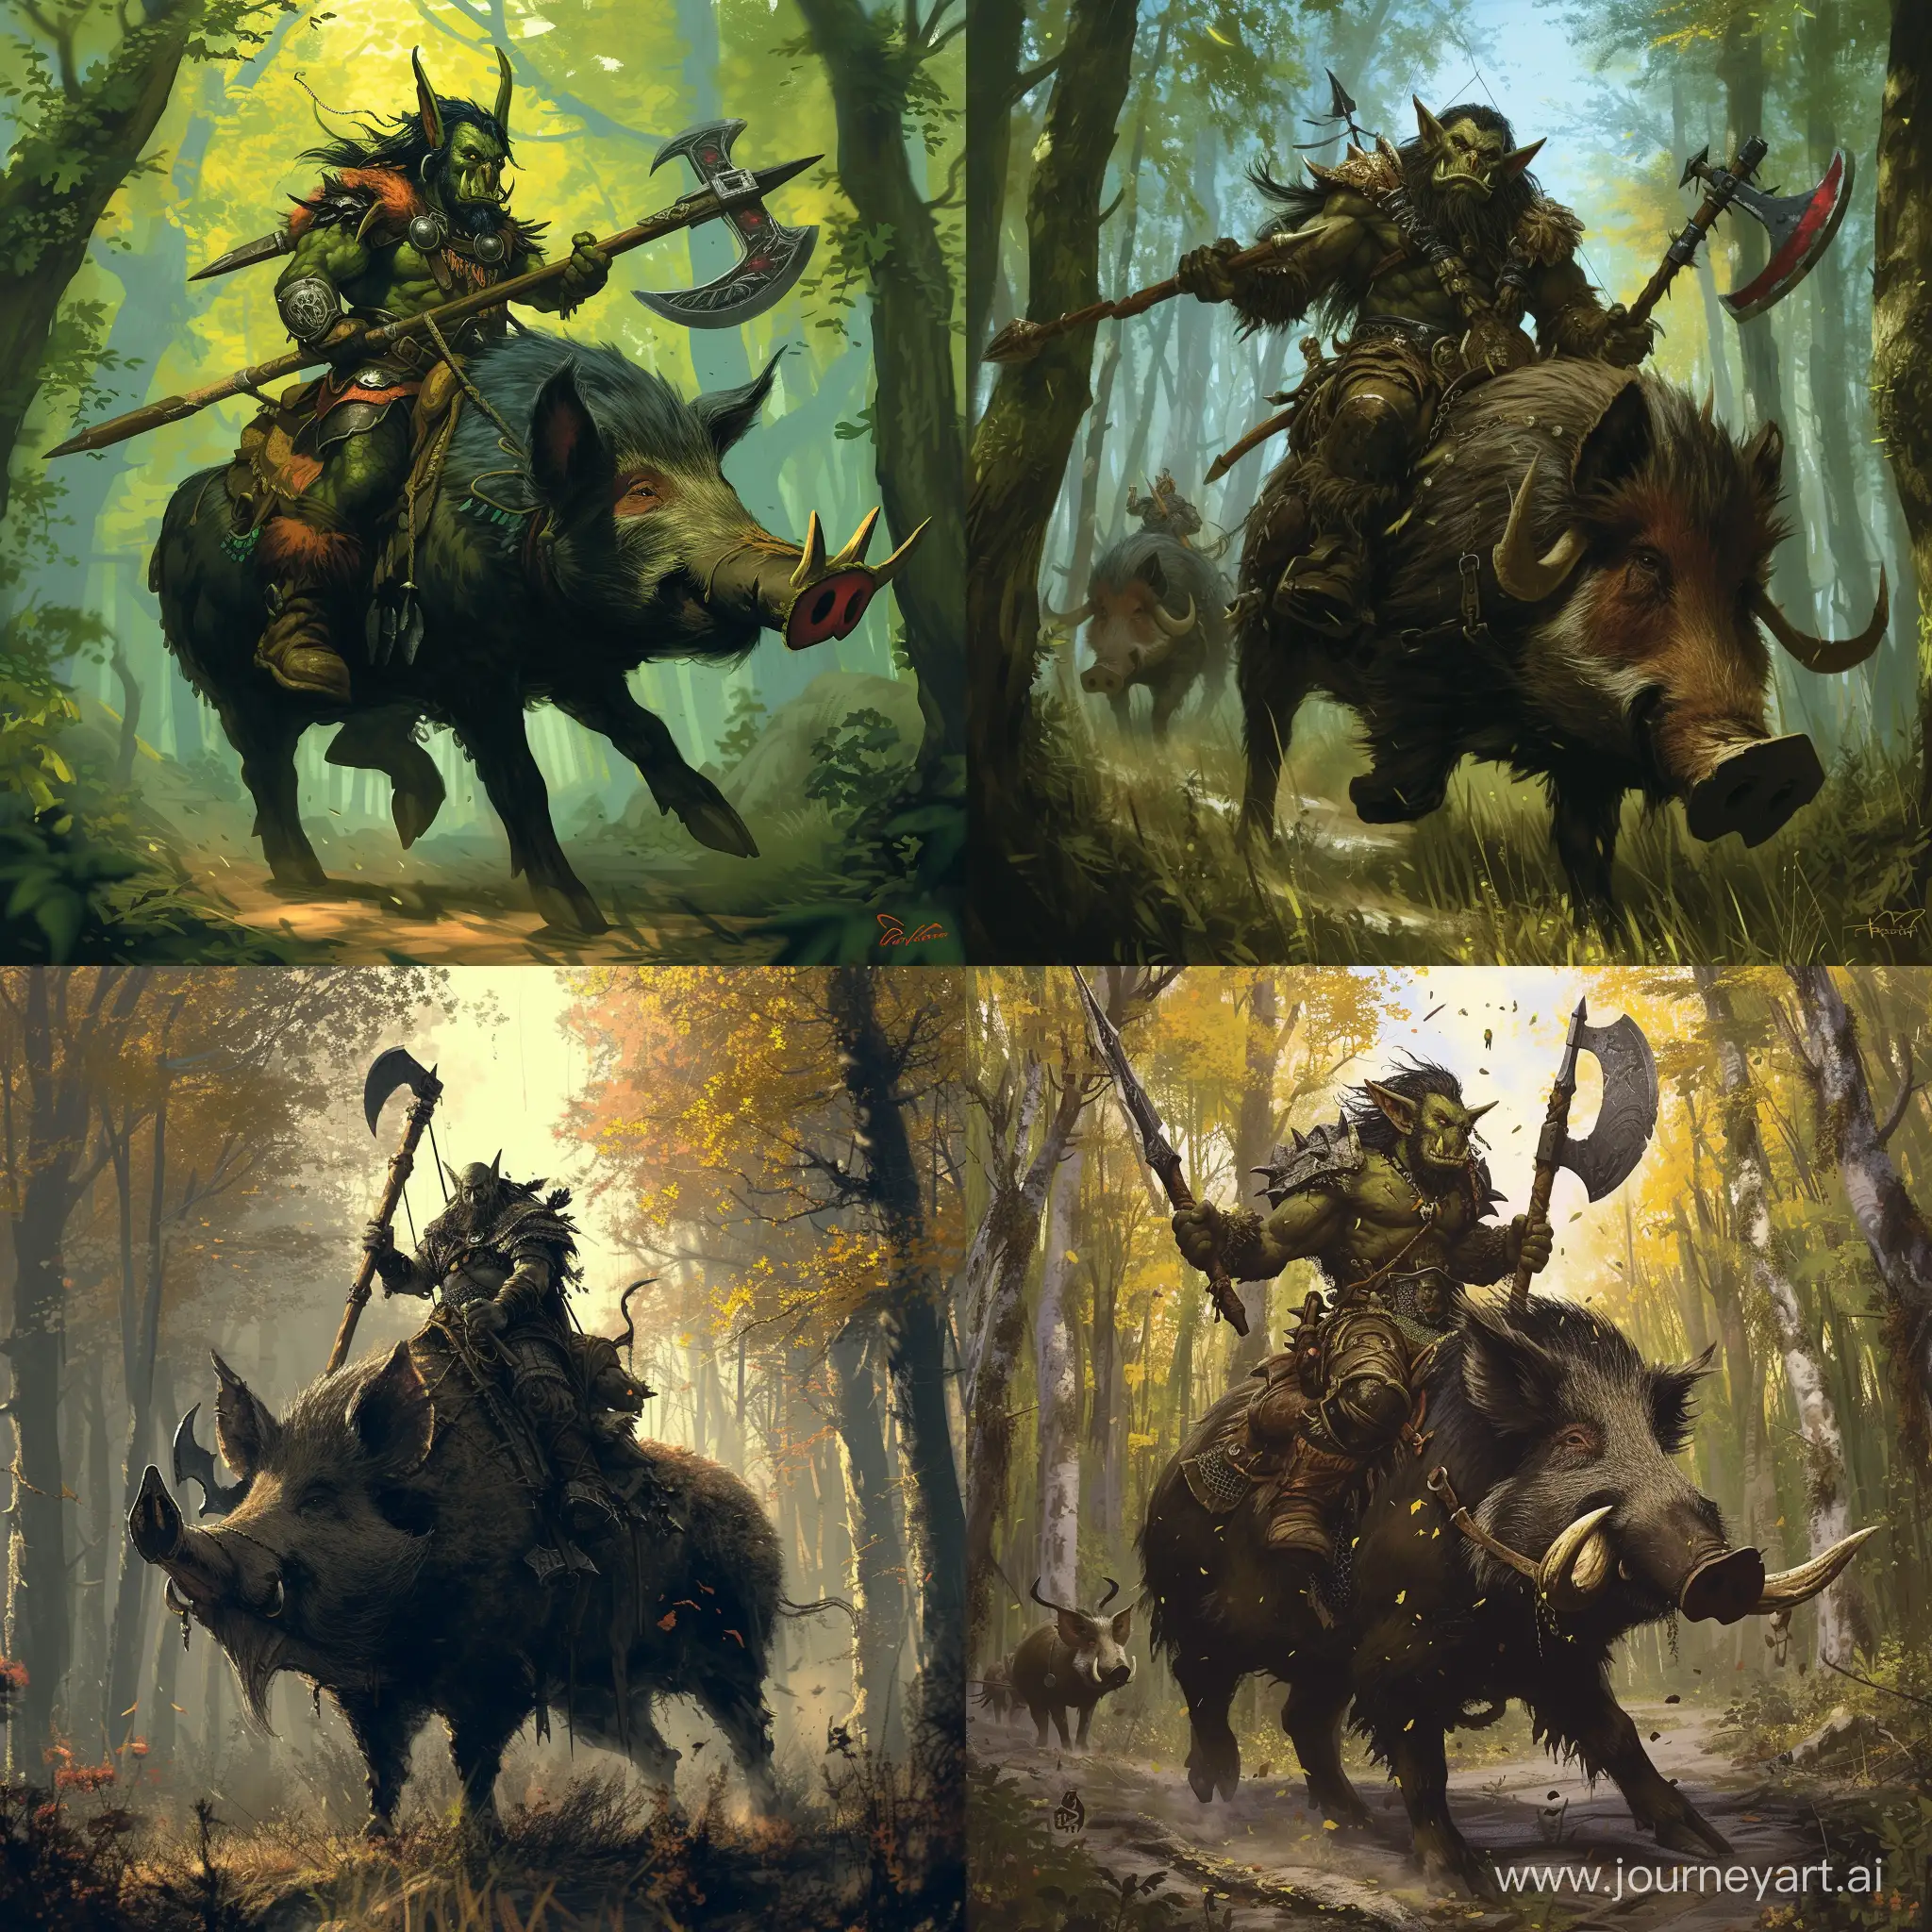 an orc rider armed with a halberd mounted on a wild boar in a forest